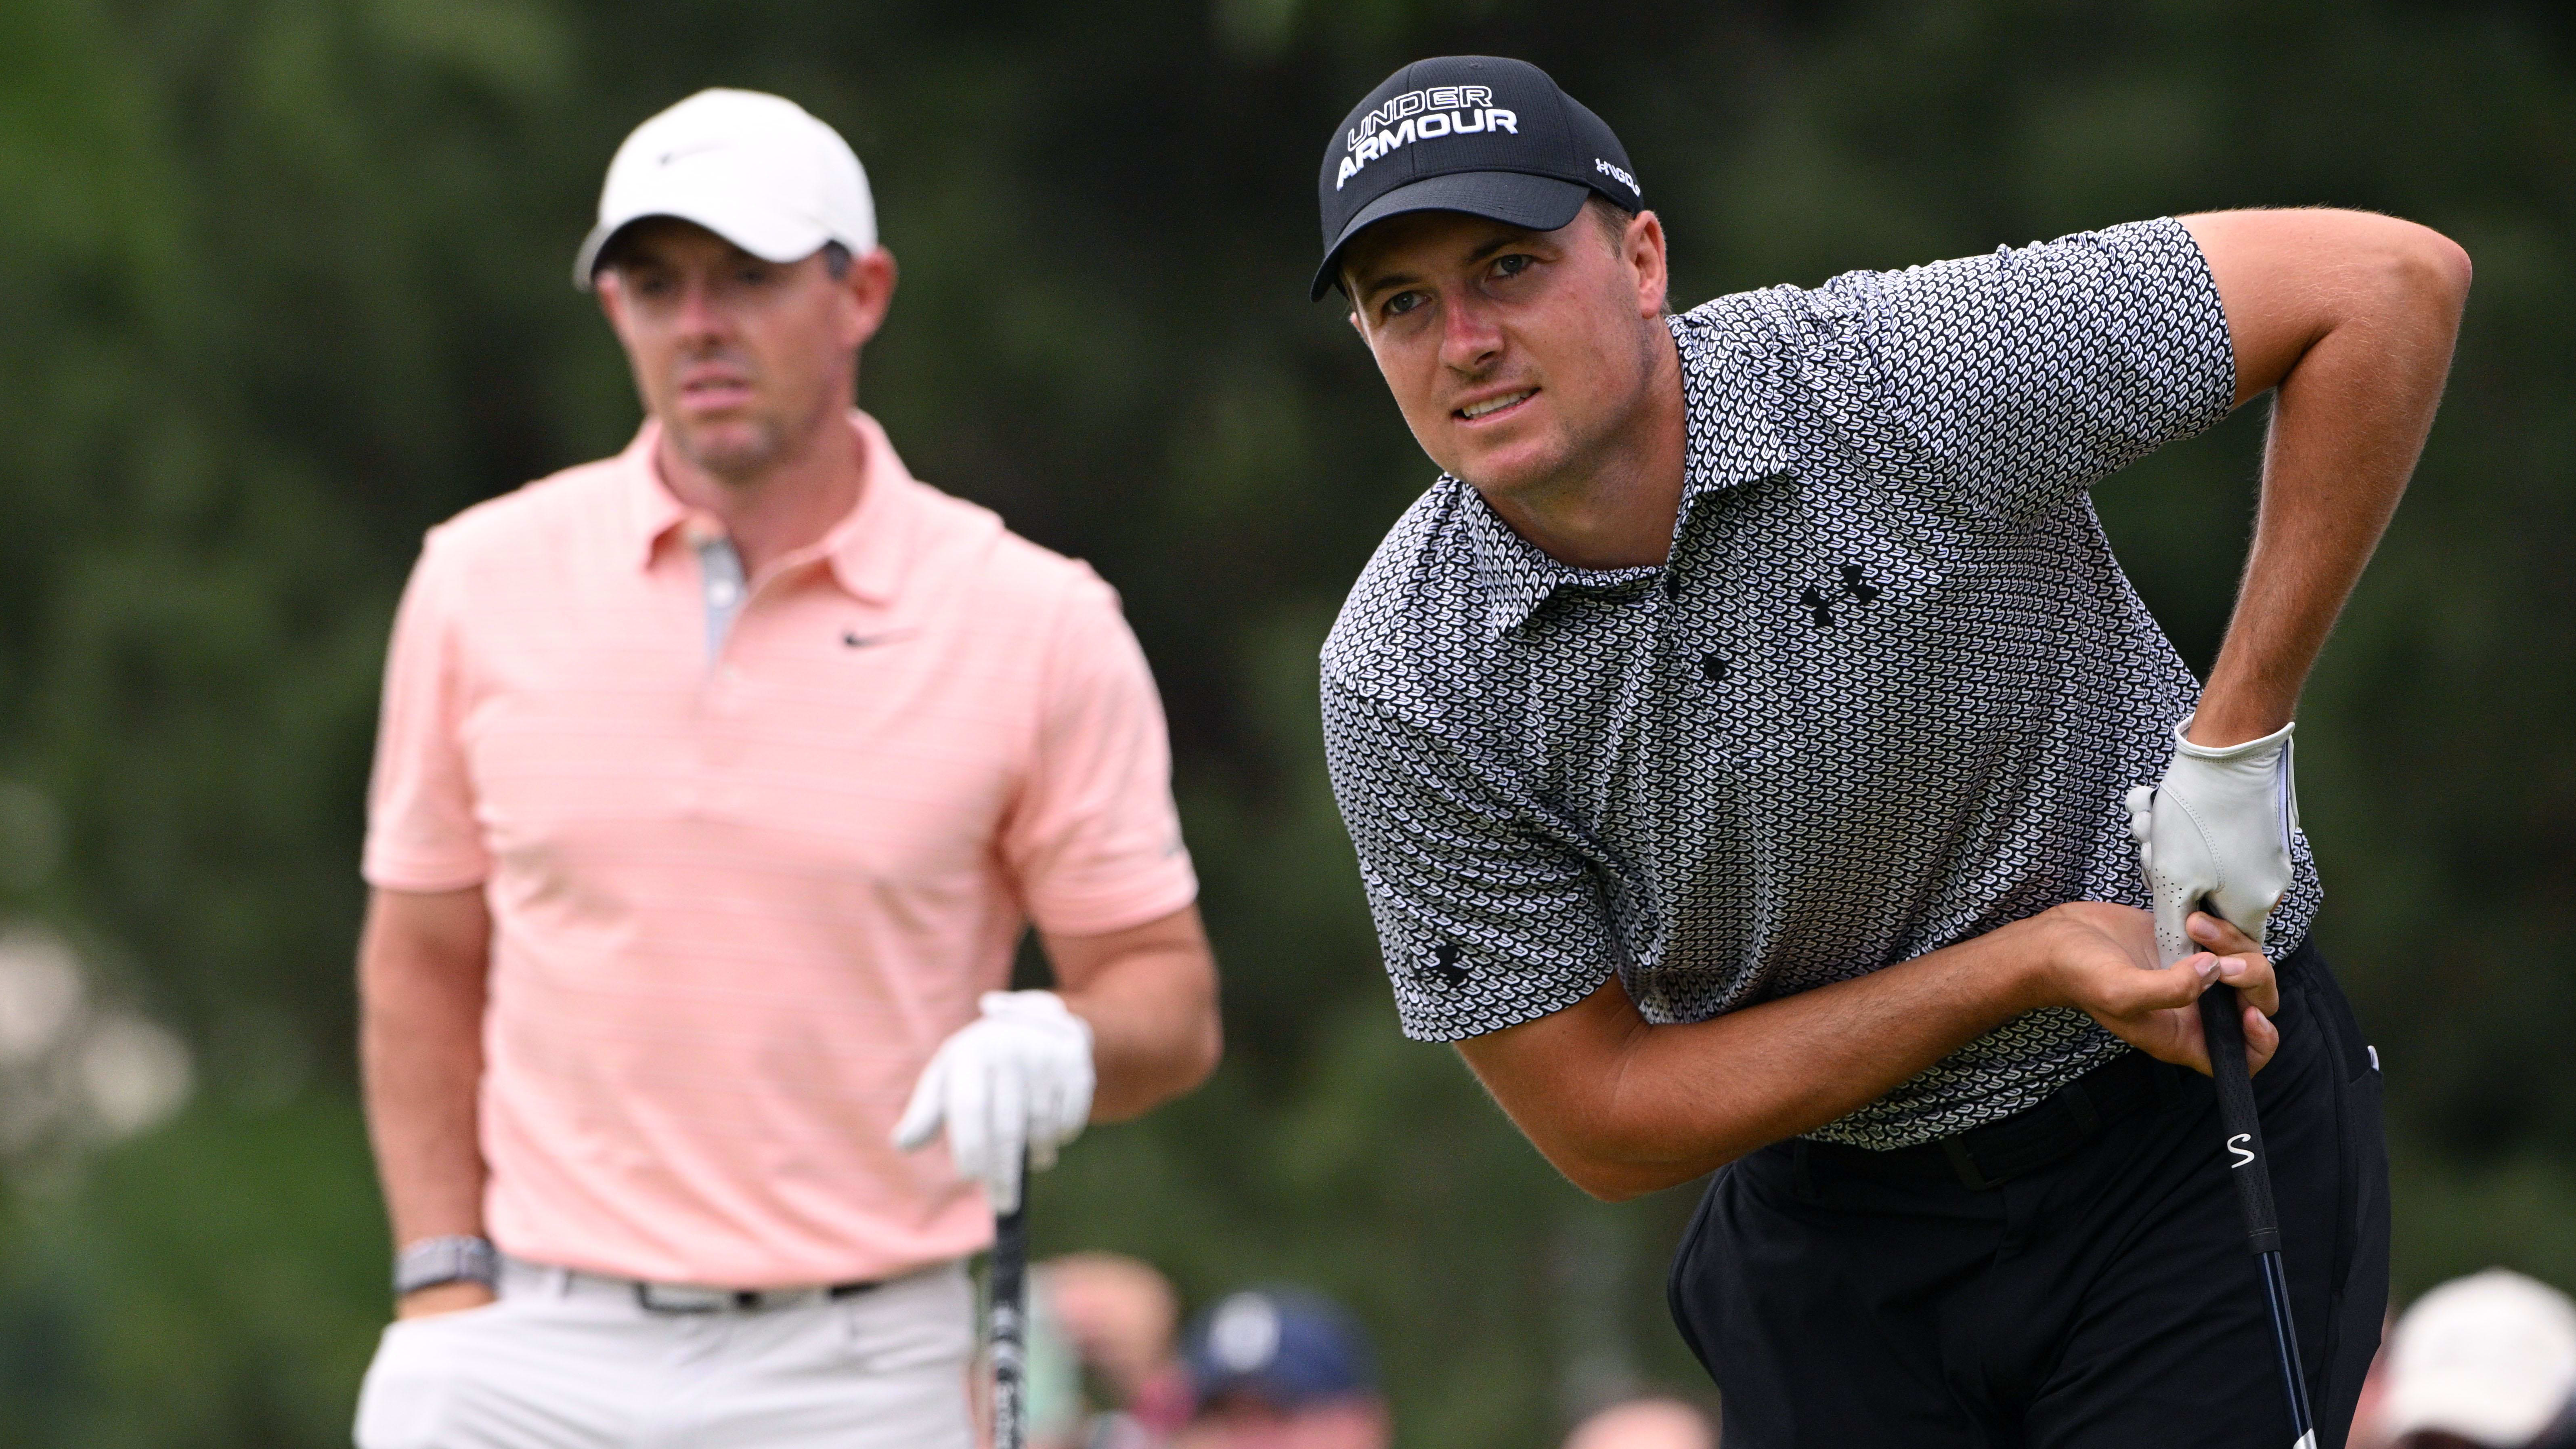 Rory McIlroy (left) and Jordan Spieth are pictured at the 2022 PGA Championship.